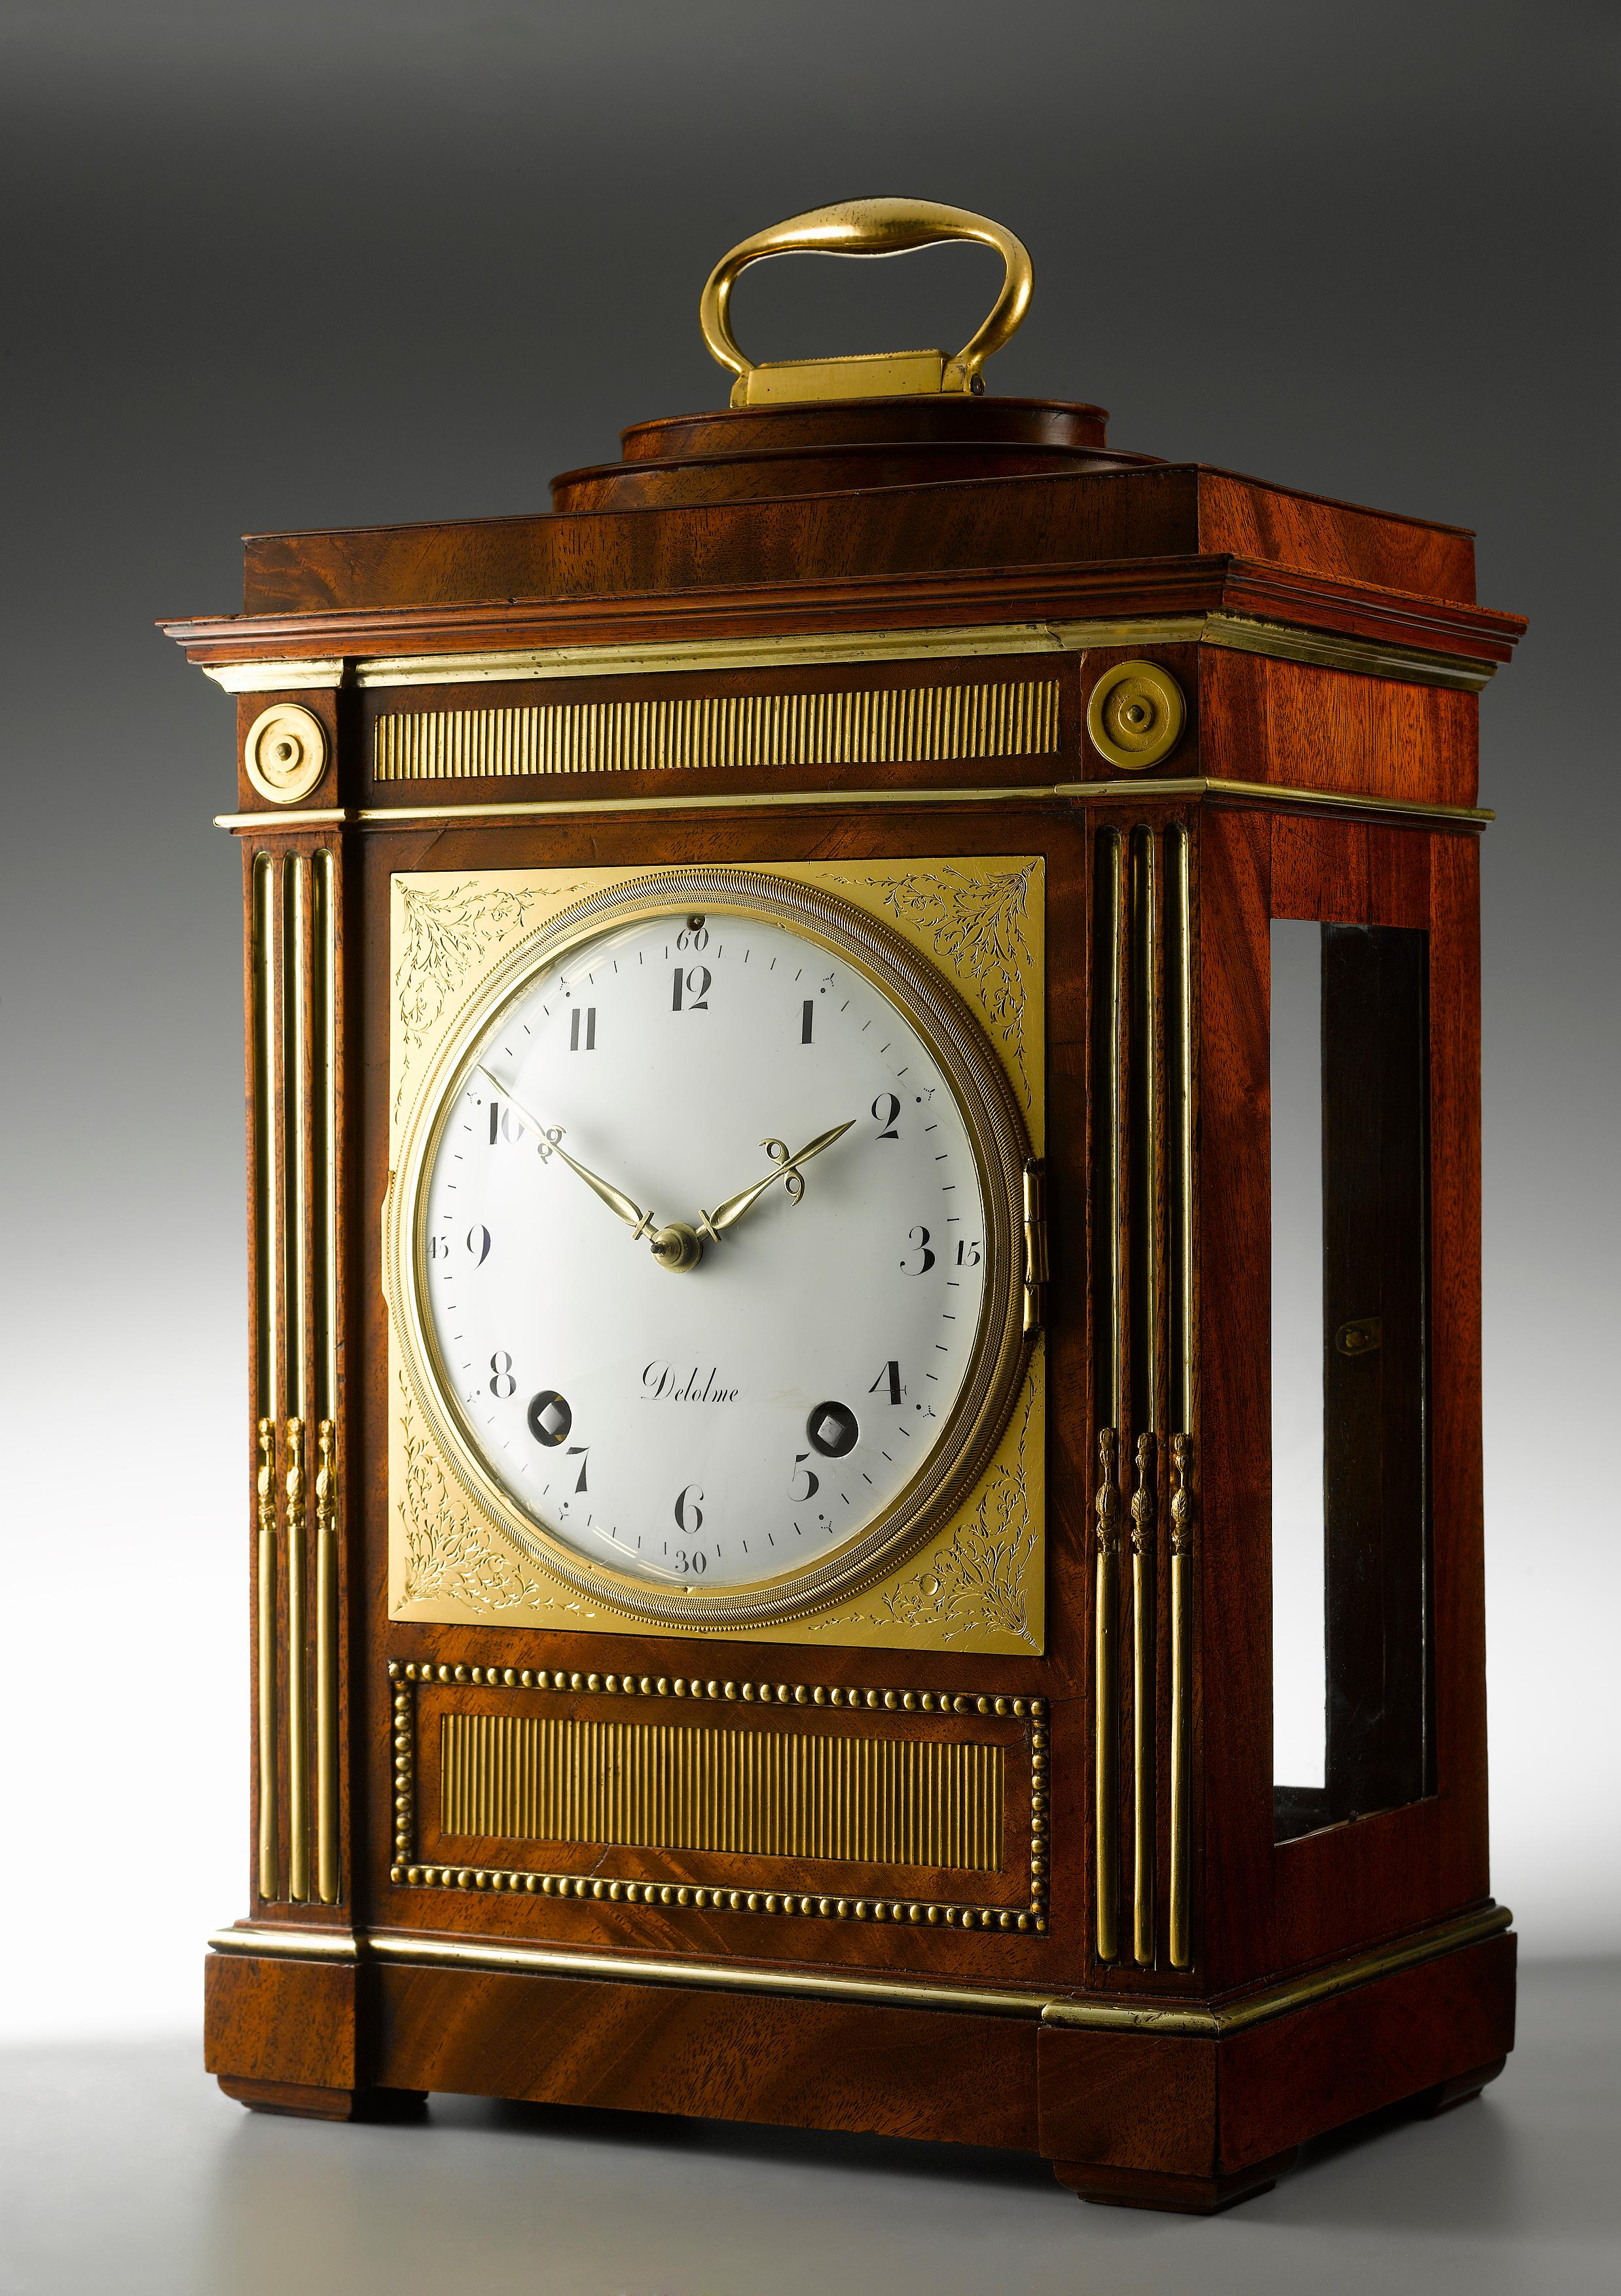 An important and rare table clock from the workshop of David Roentgen. The case with an oval stepped plinth top with gilt bronze handle, decoration of the case with ormolu mille raie banding, beaded edges and brass fluted columns to the front